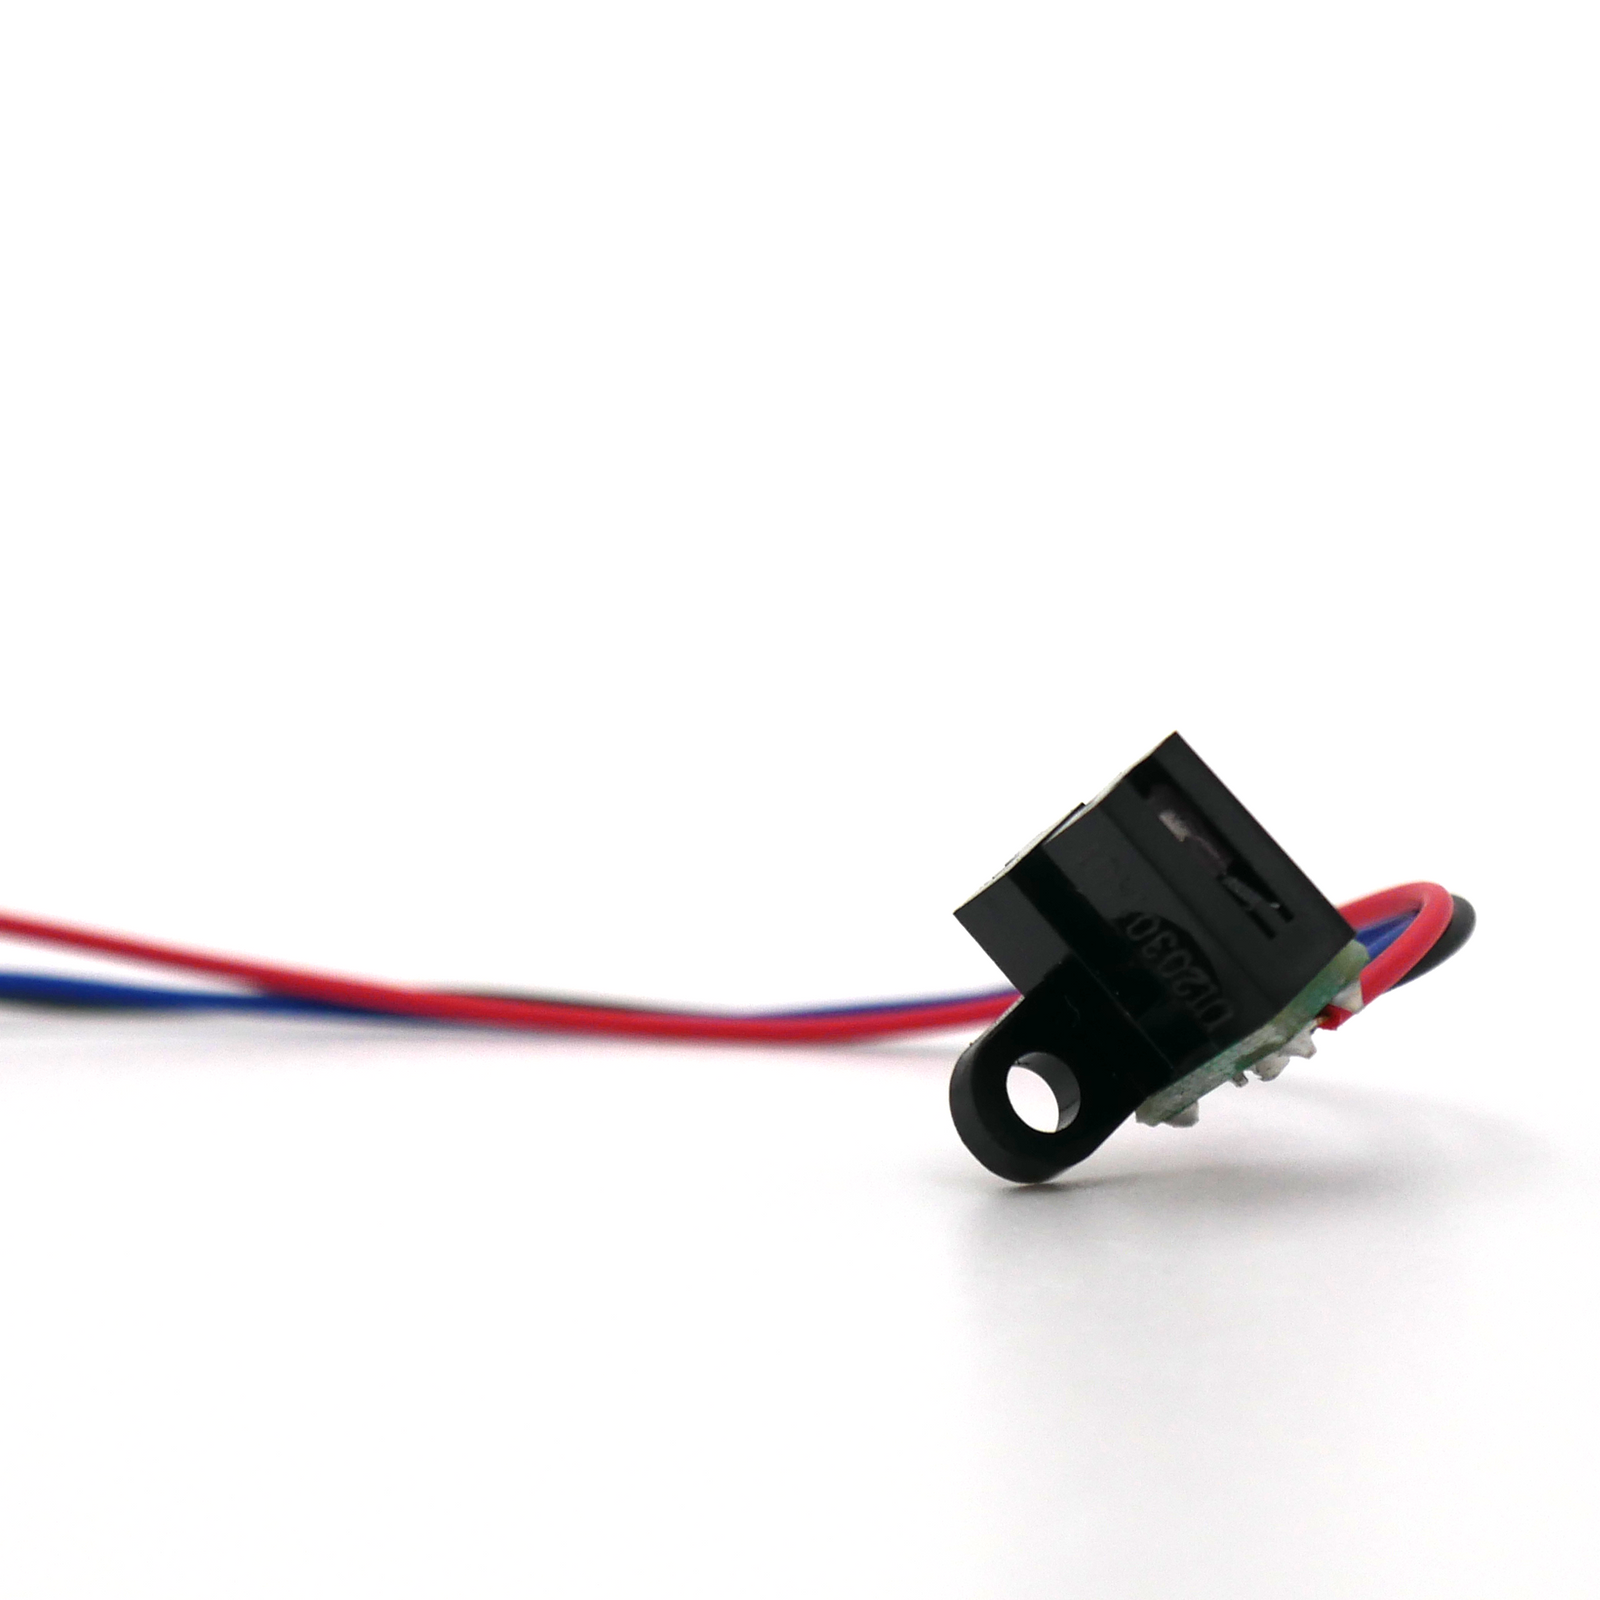 Close up of the black JORES TECHNOLOGIES coding position sensor with red, black and blue cables.